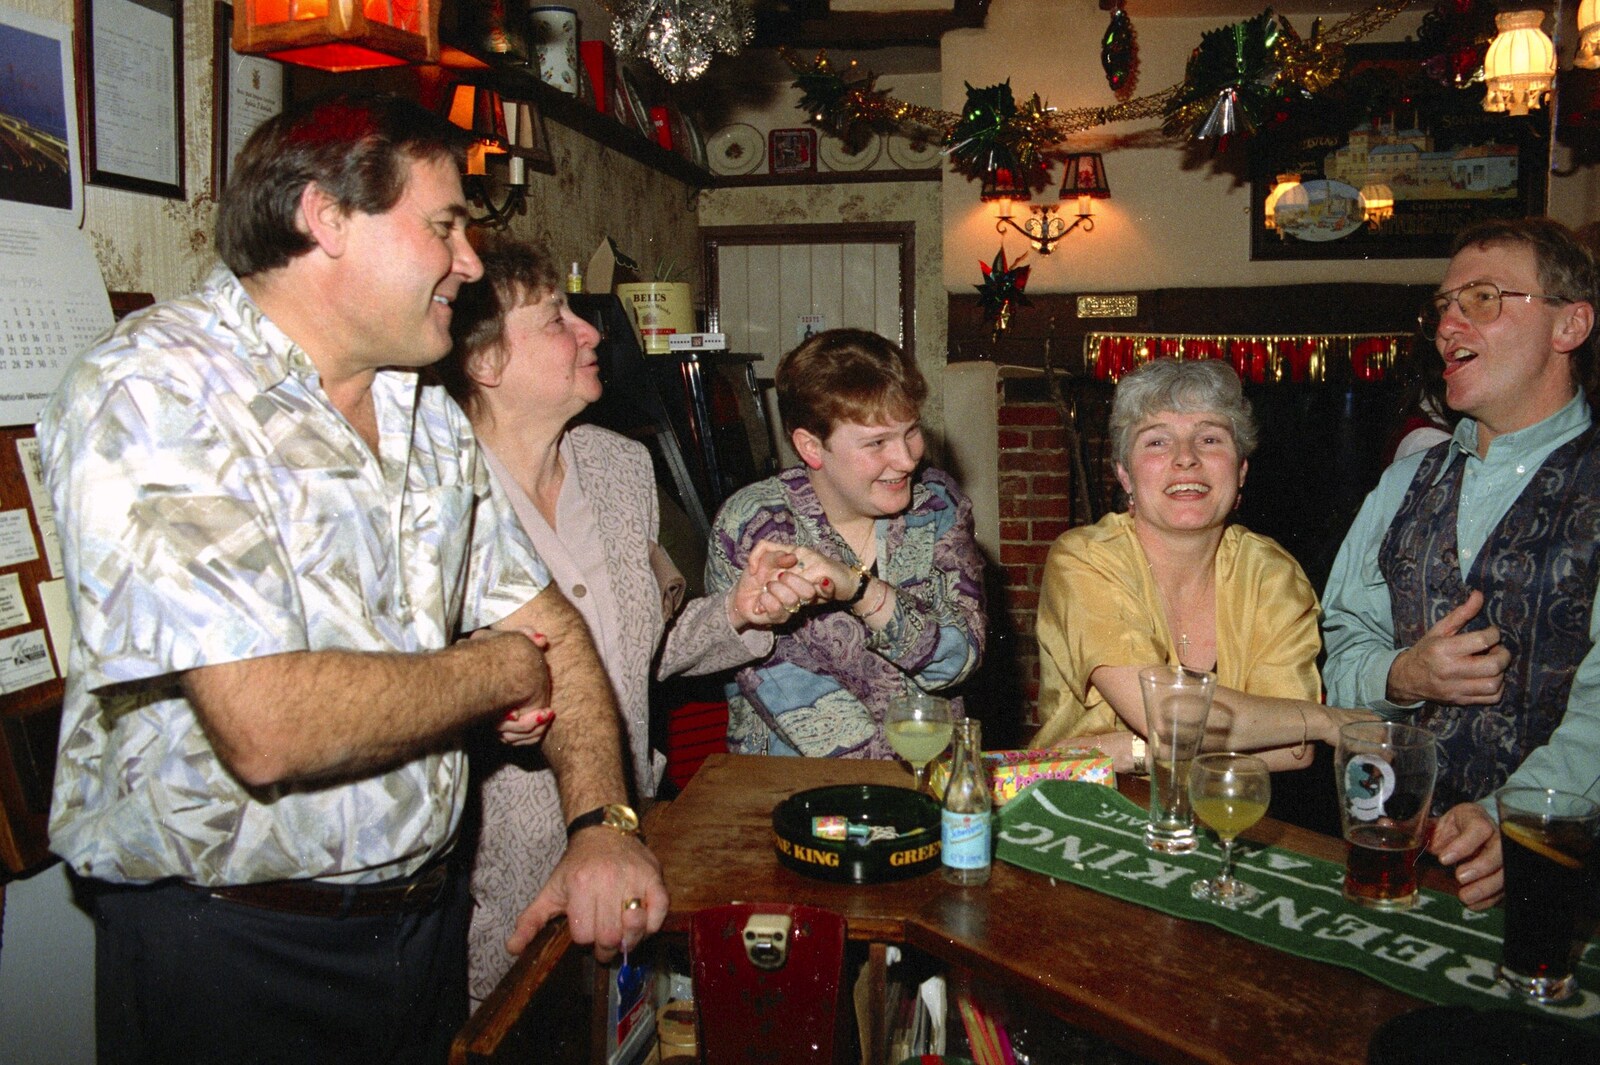 A bit of Auld Lang Syne from New Year's Eve at the Swan Inn, Brome, Suffolk - 31st December 1994